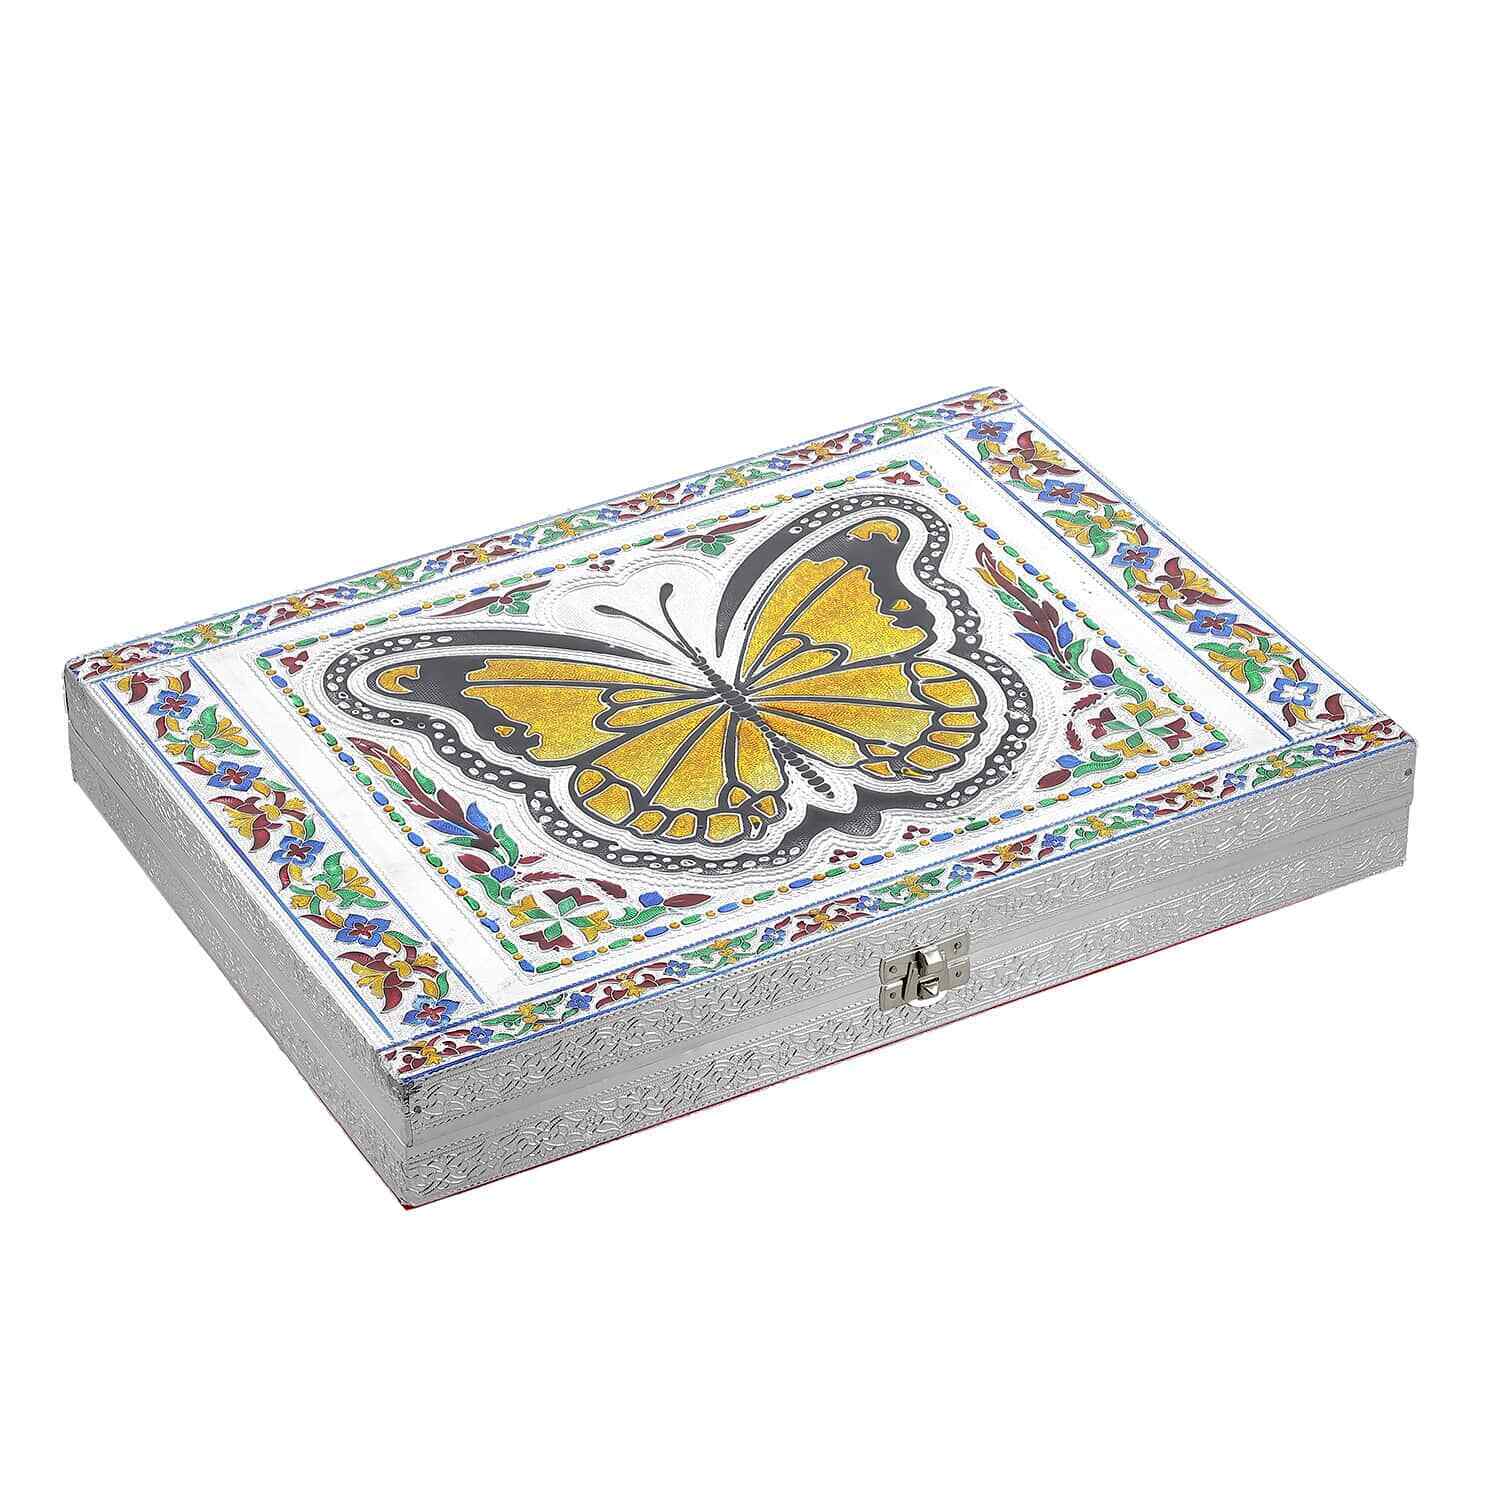 Handcrafted Aluminium Oxidized Butterfly Embossed Ring Jewelry Box Organizer